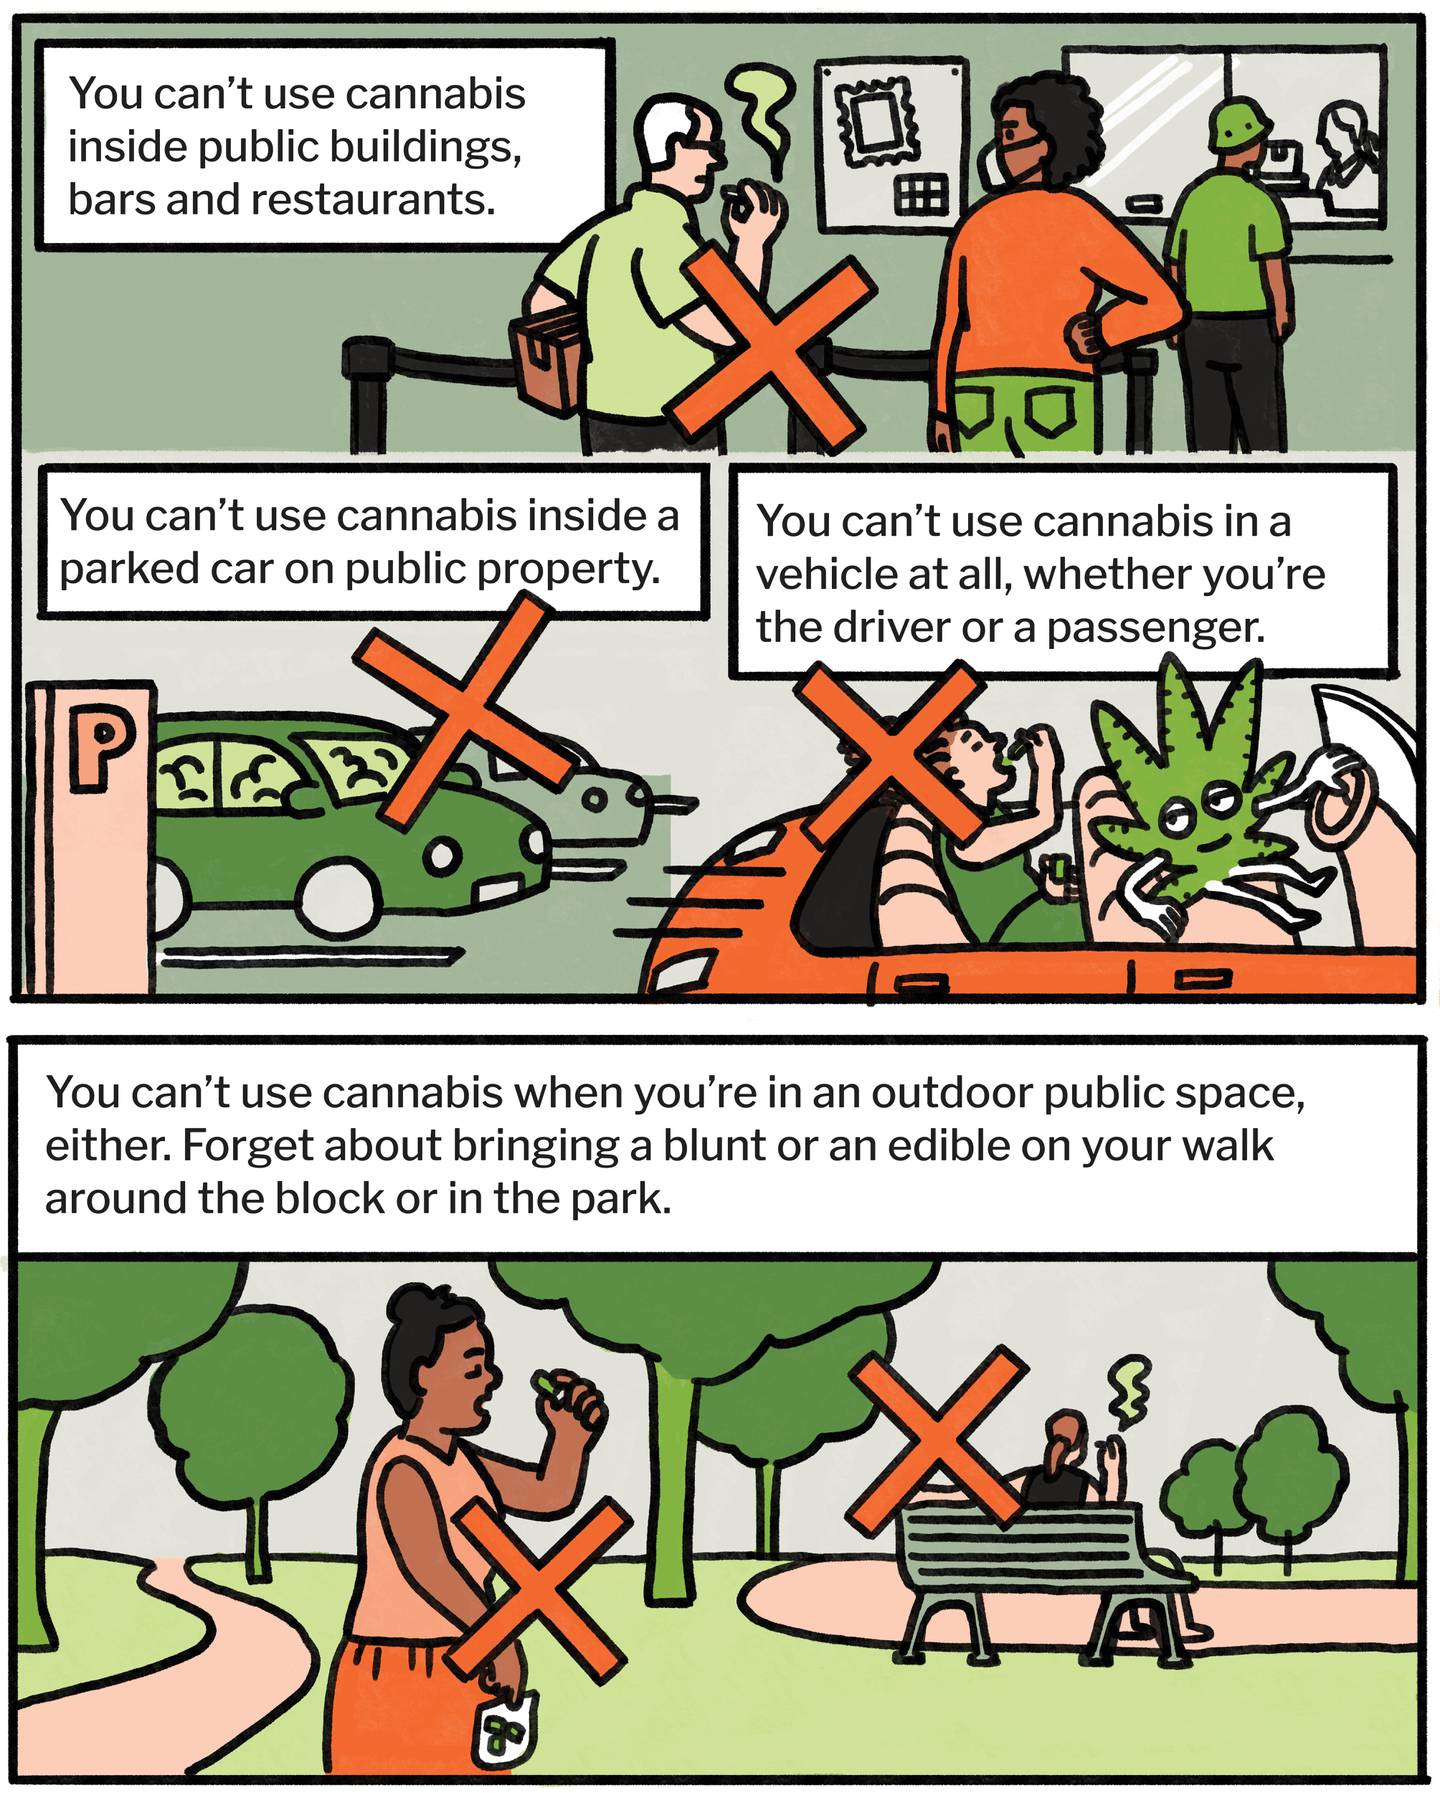 You can’t use cannabis inside public buildings, bars and restaurants. You can’t use cannabis inside a parked car on public property. You can’t use cannabis in a vehicle at all, whether you’re the driver or a passenger. You can’t use cannabis when you’re in an outdoor public space, either. Forget about bringing a blunt or an edible on your walk around the block or in the park.